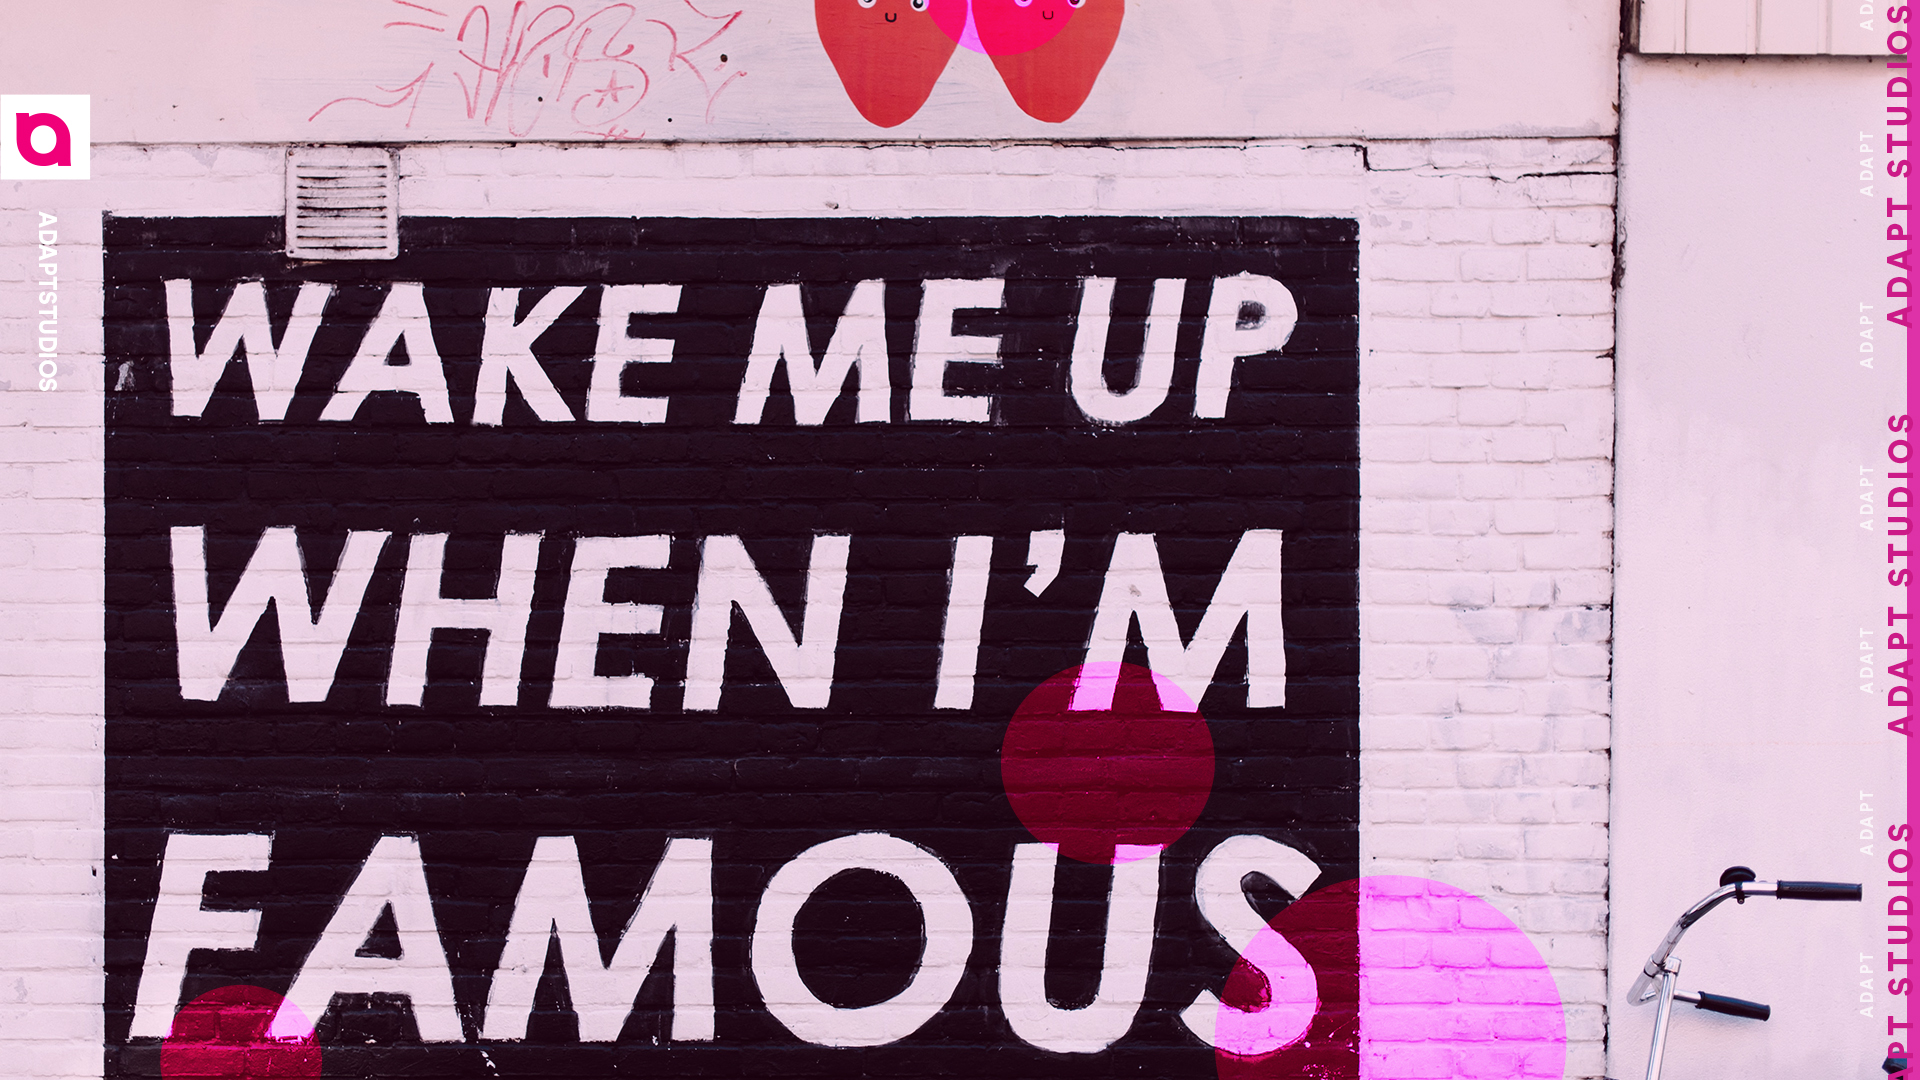 Wall art stating "Wake me up when I'm famous," for the Adapt Studios Growing Your Instagram blog